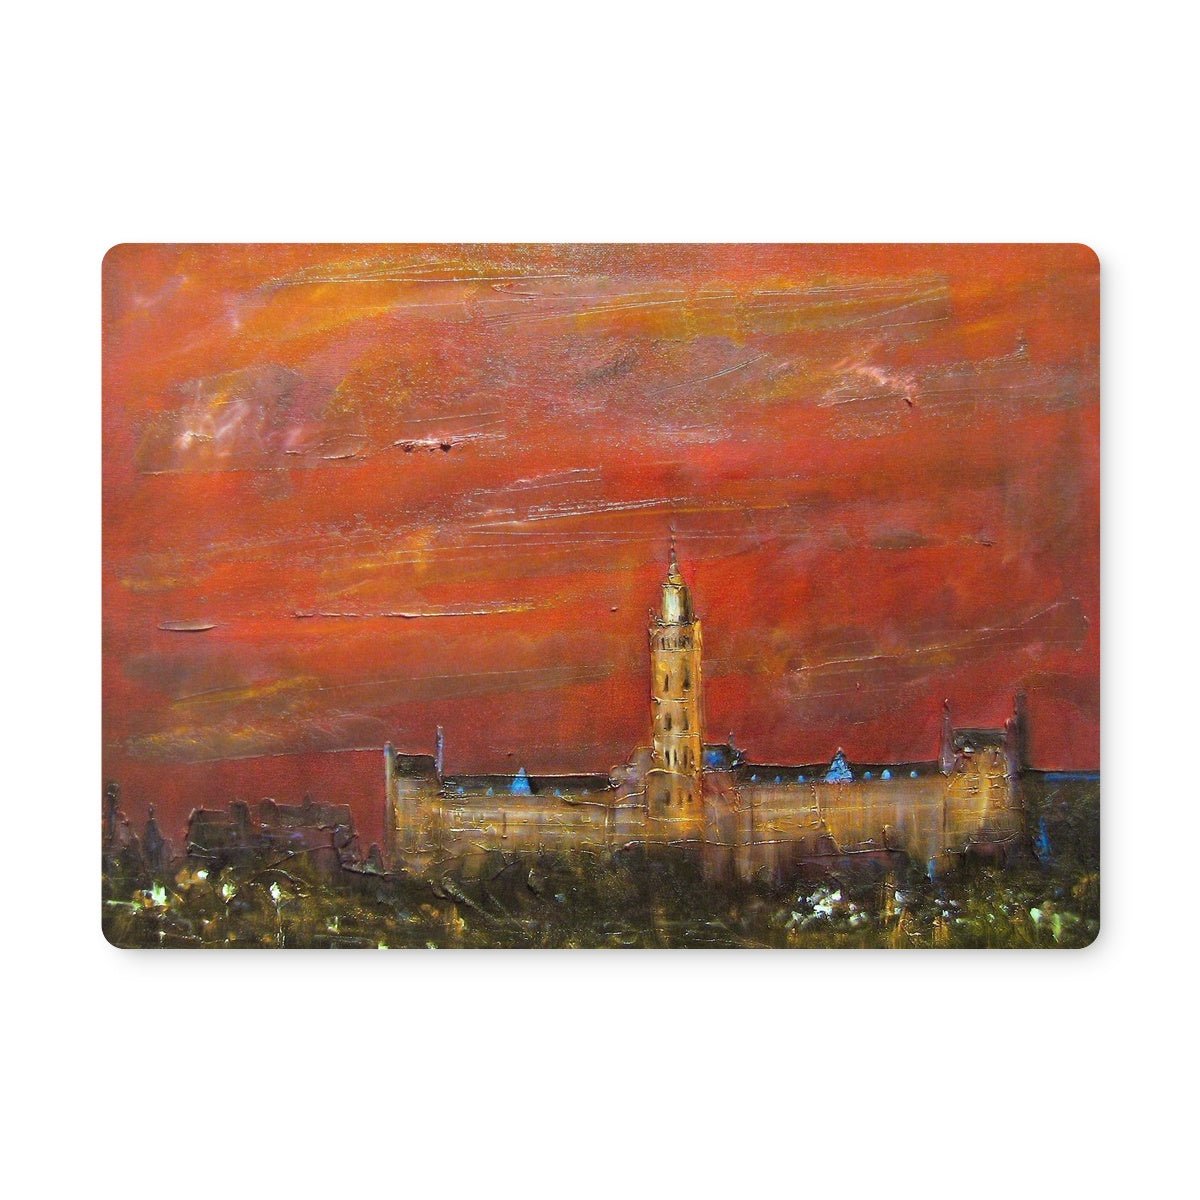 Glasgow University Dusk Art Gifts Placemat-Placemats-Edinburgh & Glasgow Art Gallery-2 Placemats-Paintings, Prints, Homeware, Art Gifts From Scotland By Scottish Artist Kevin Hunter